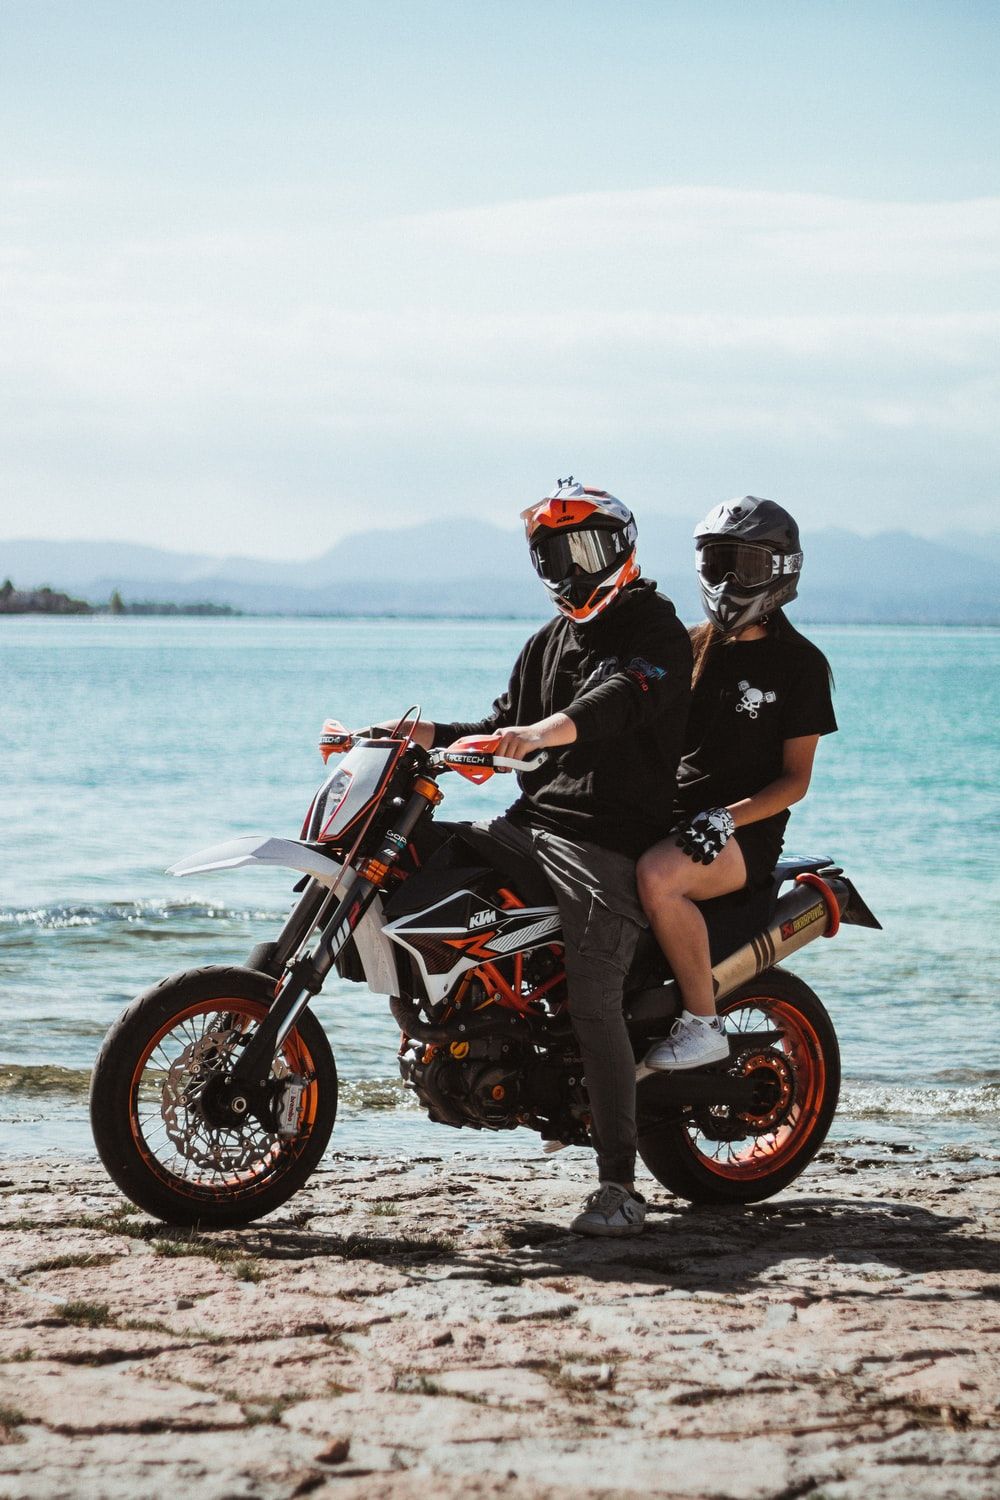 Couple Biker Picture. Download Free Image